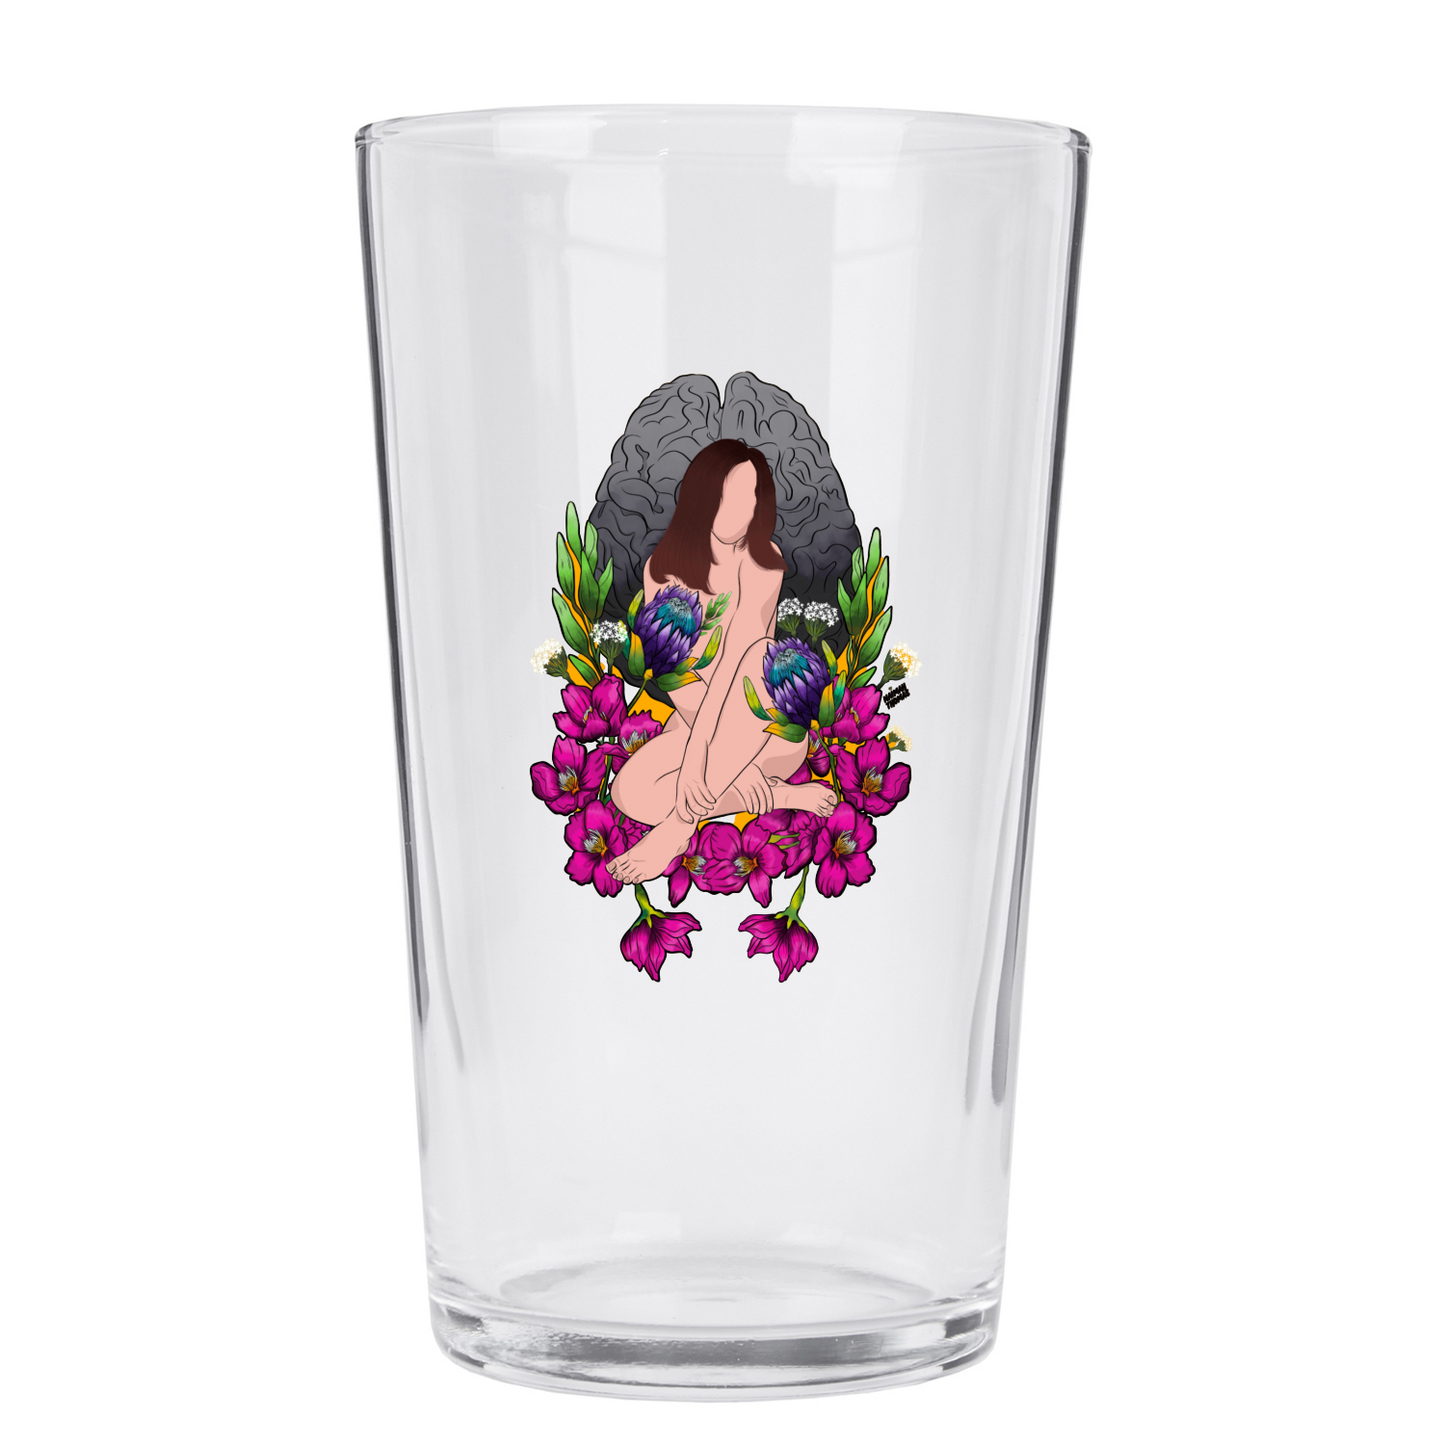 "Wandering amongst the cherry blossoms" Pint Glass